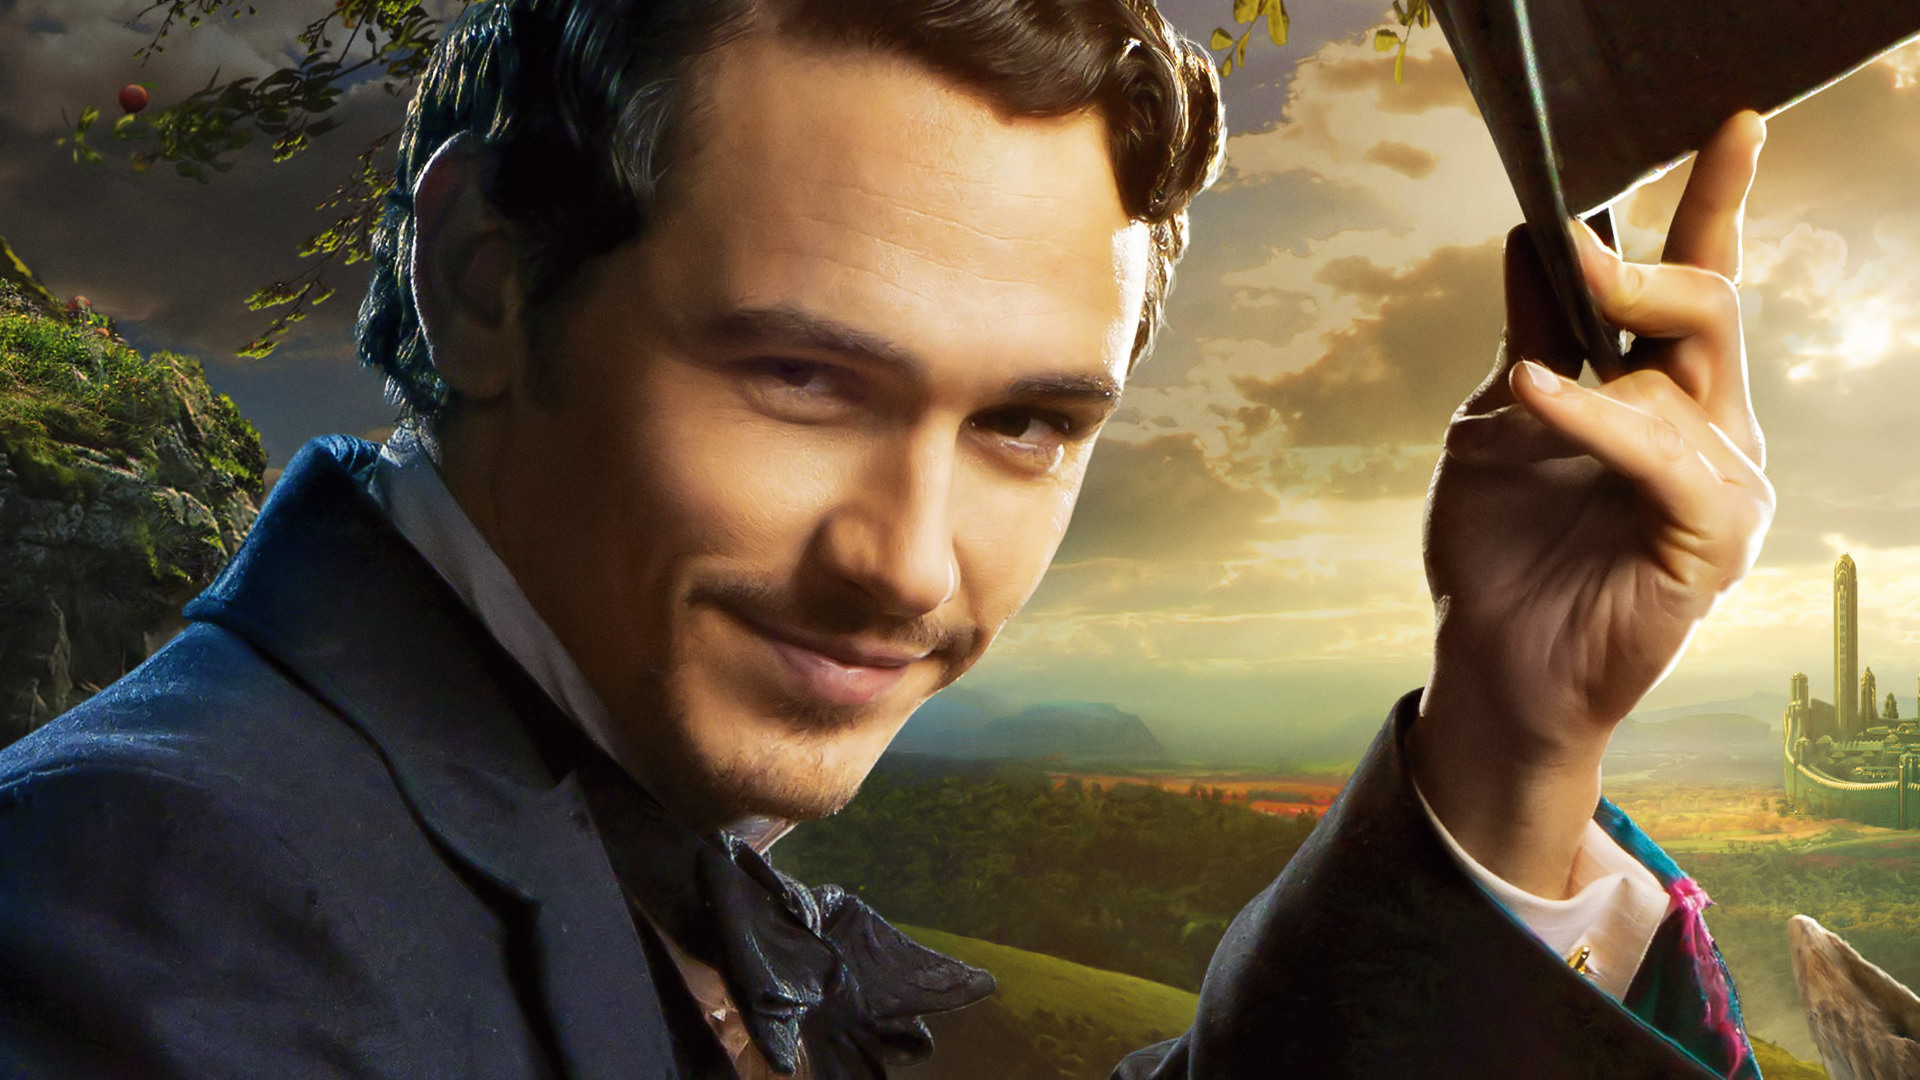 Movie Oz the Great and Powerful HD Wallpaper | Background Image